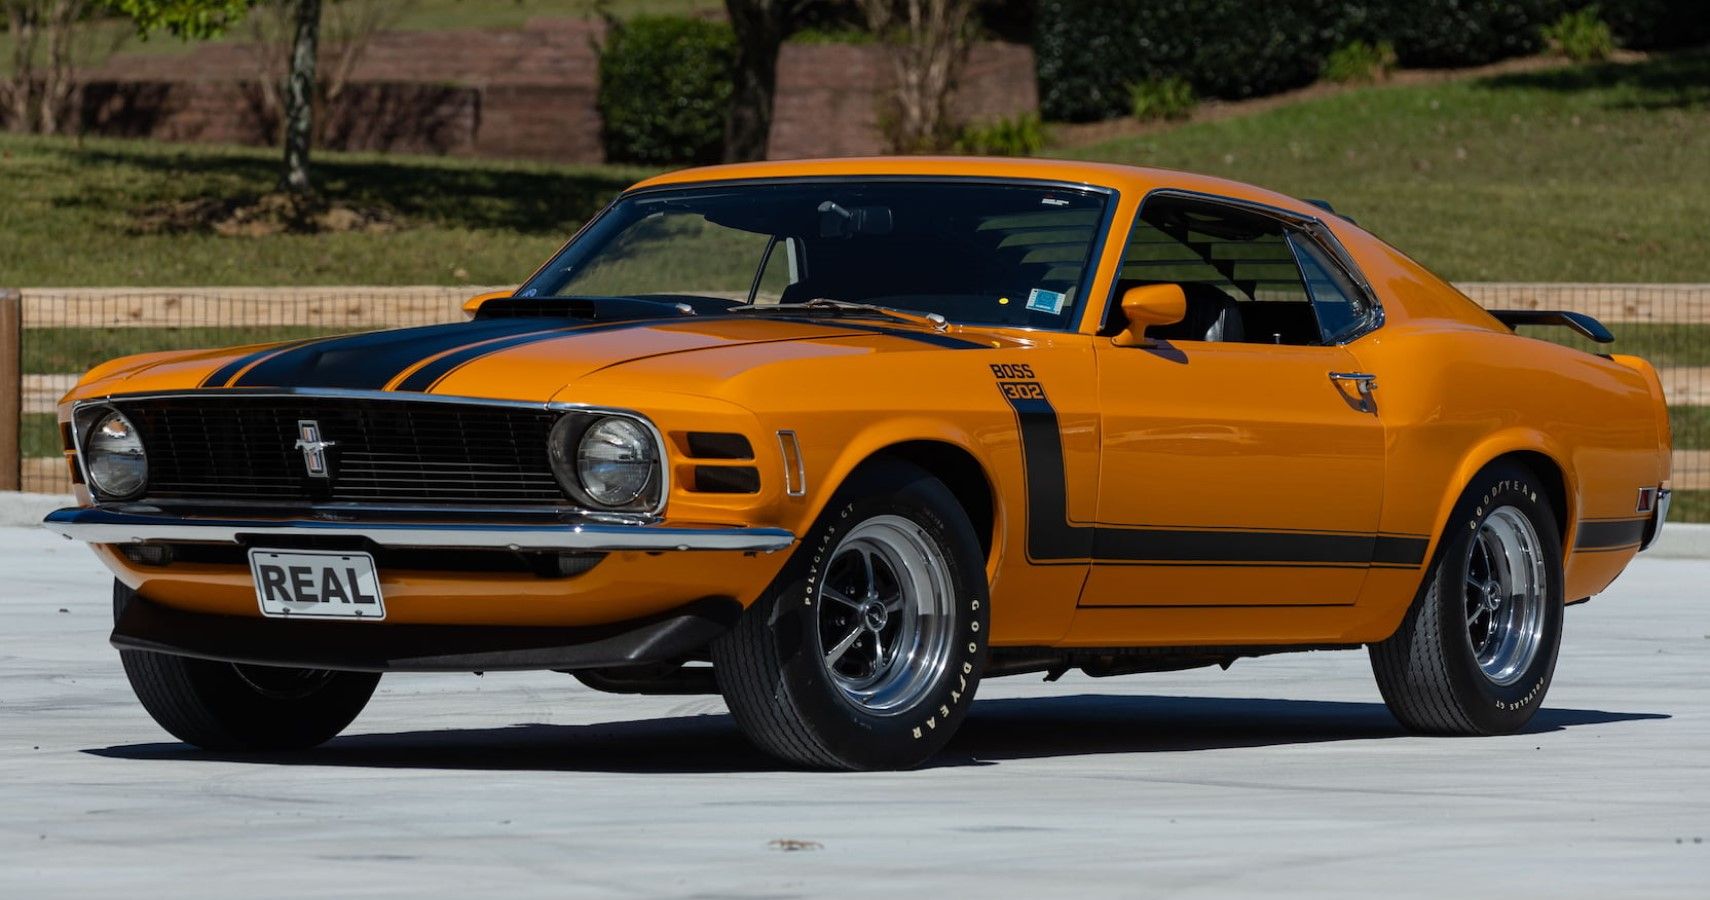 Why The Ford Boss 302 Is Perfect For A Gearhead's Car Garage